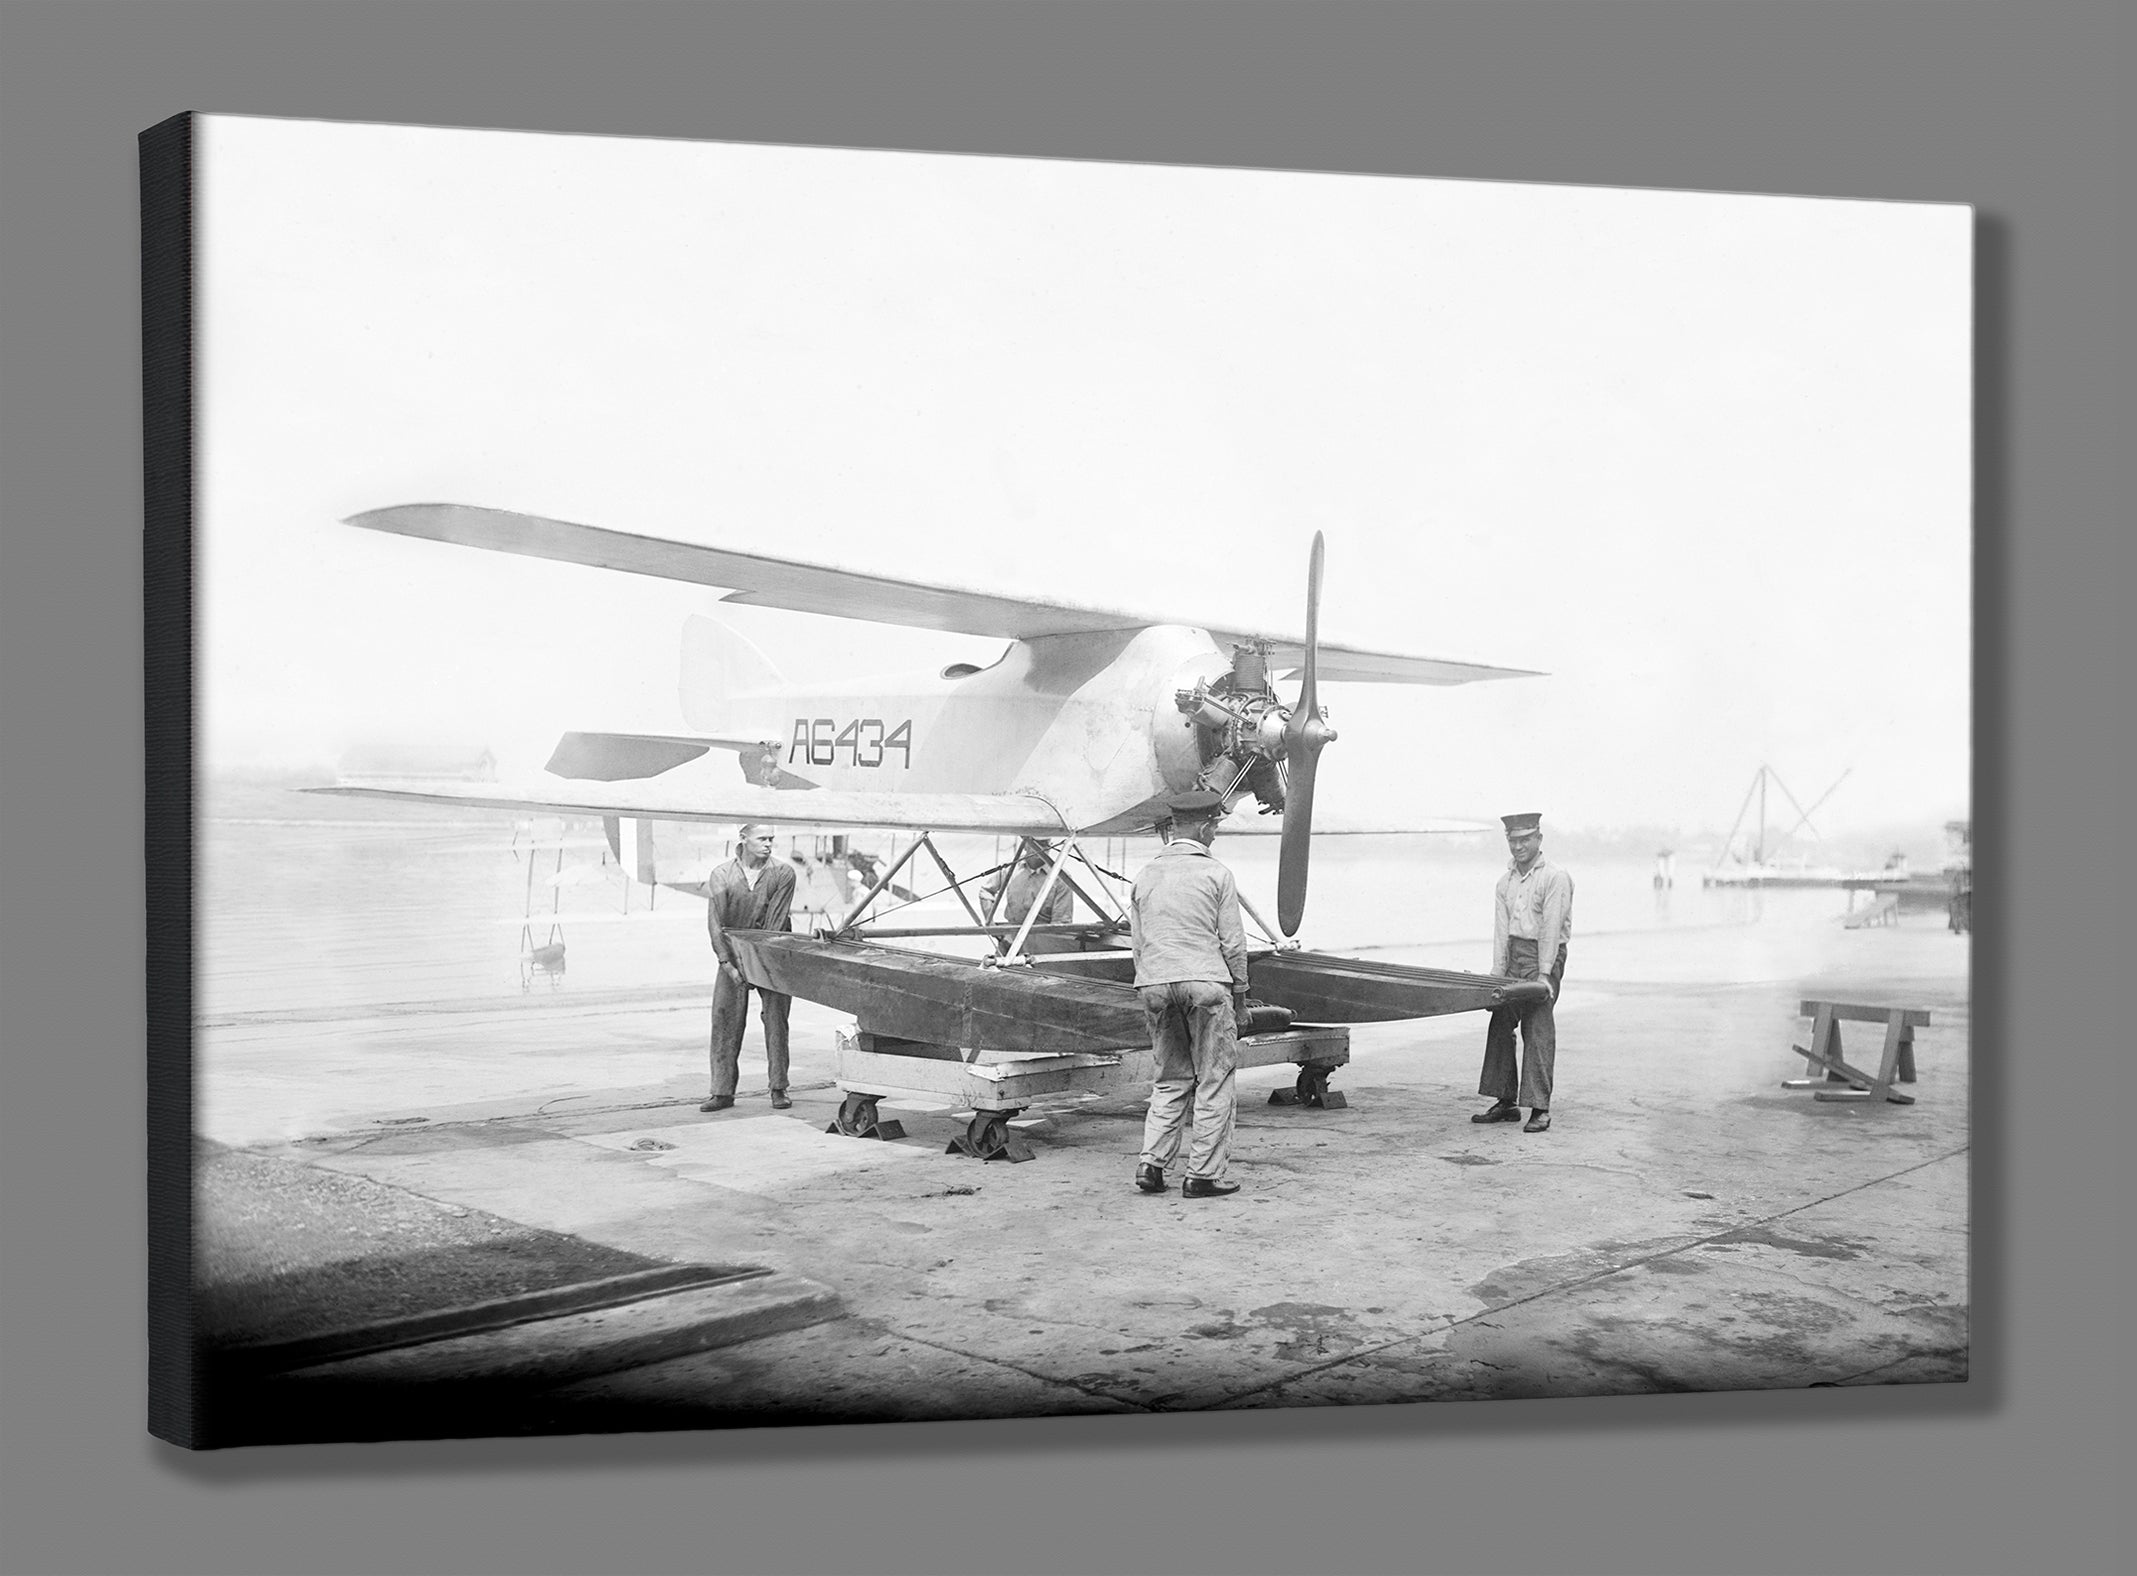 A canvas reproduction of a vintage photograph of men with a submarine plane